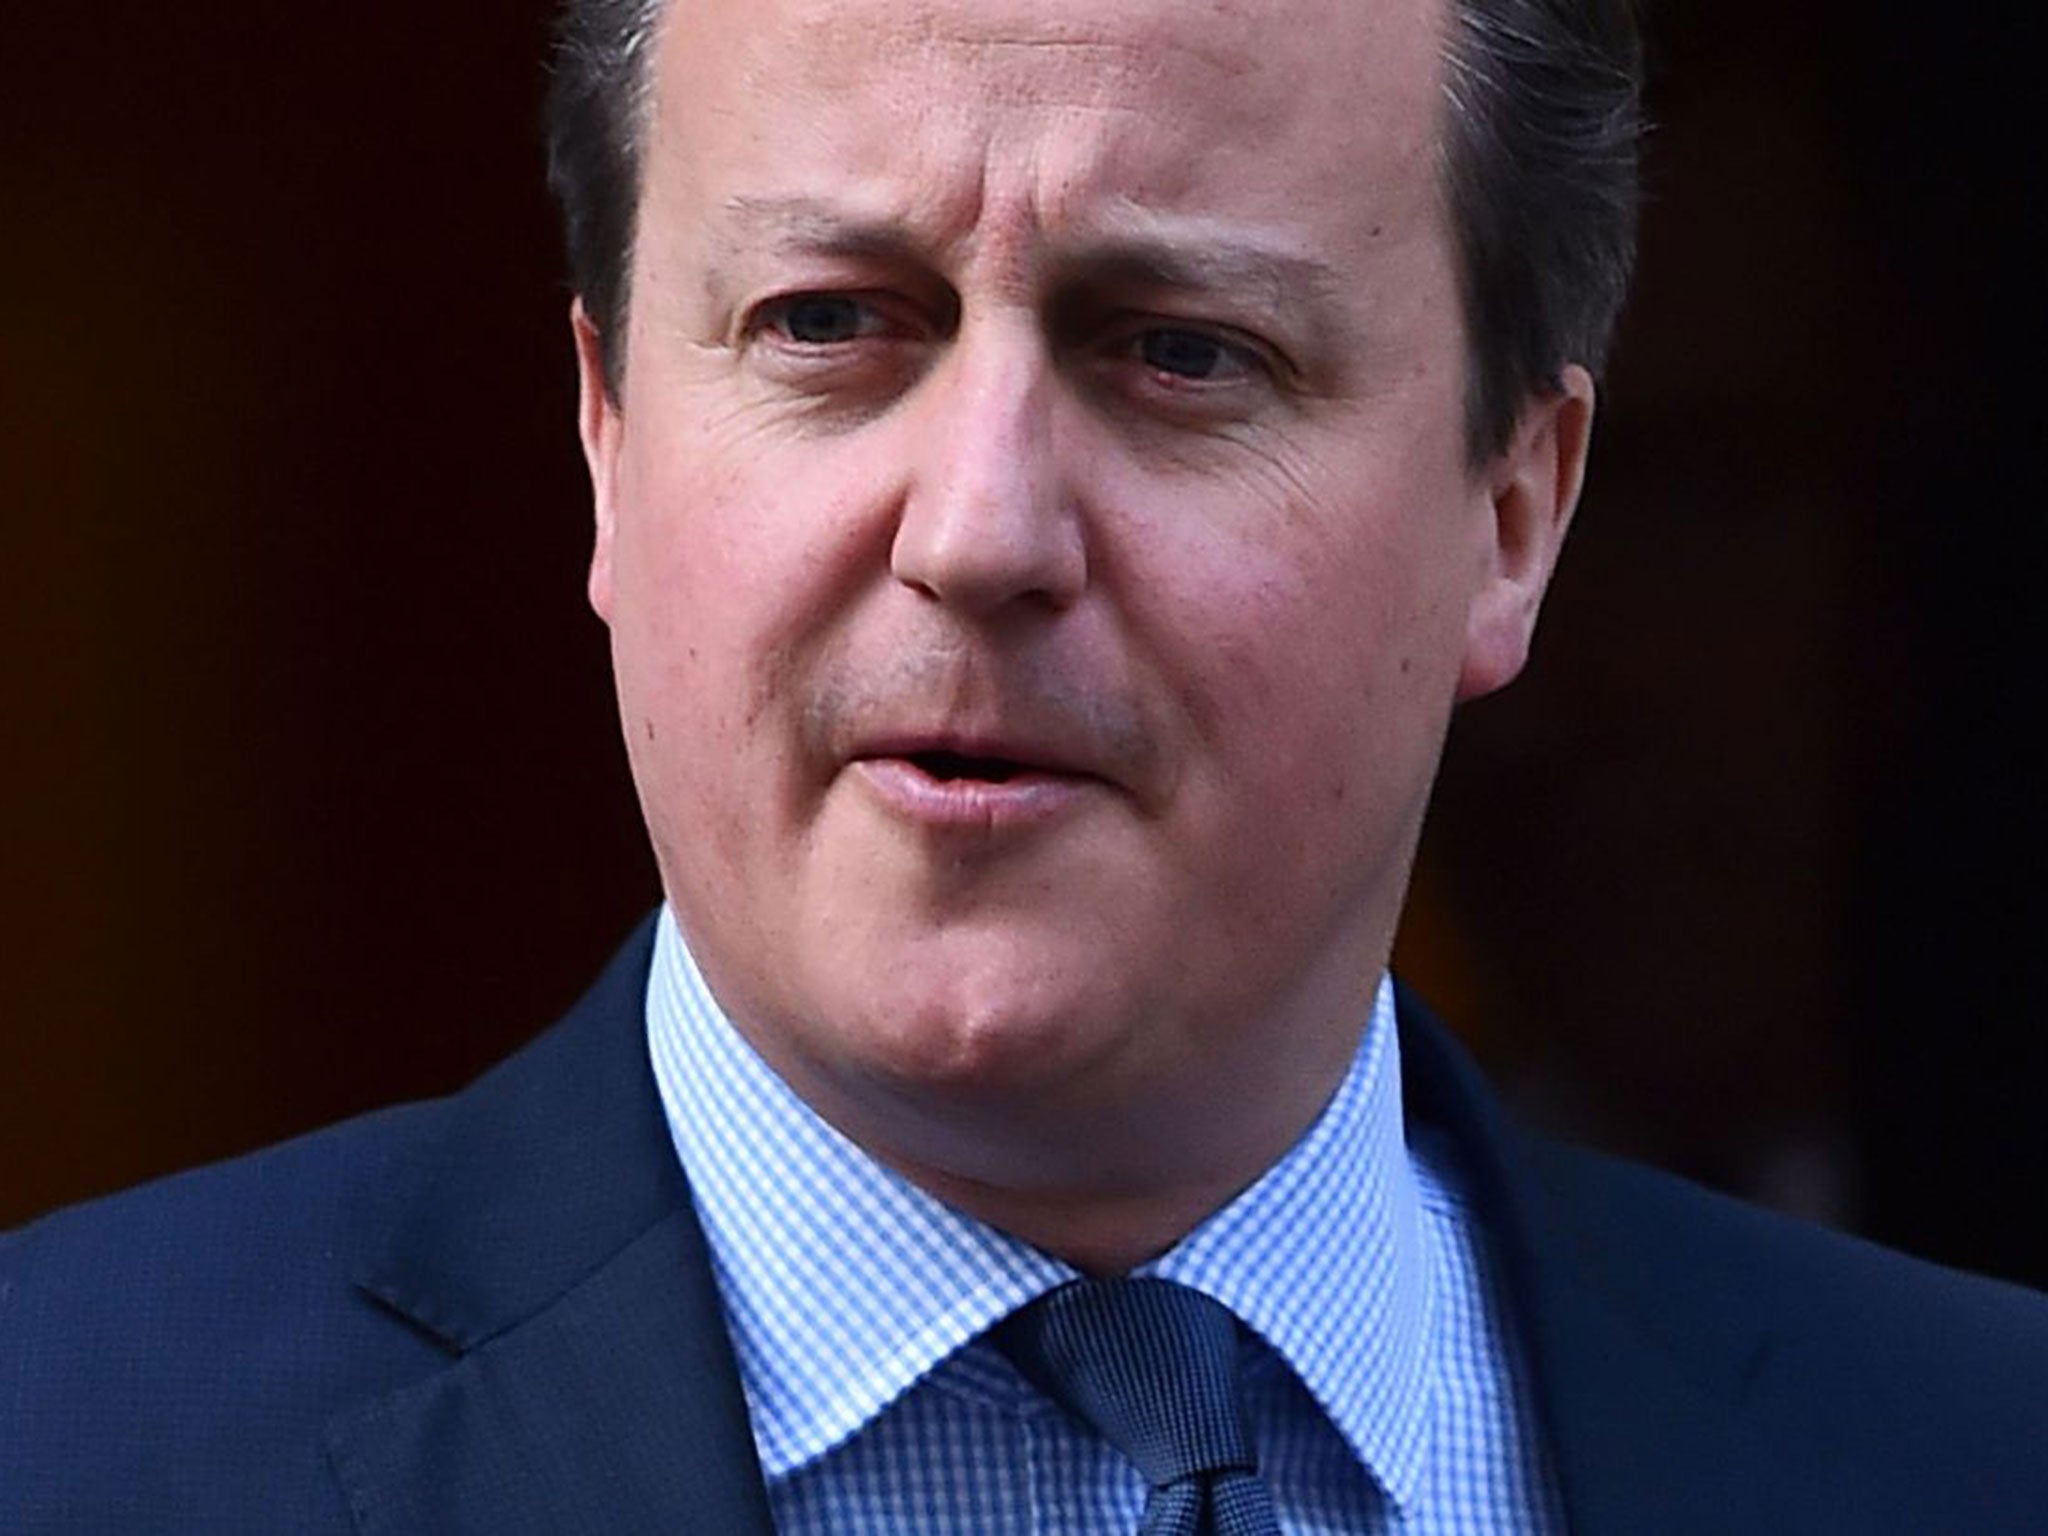 David Cameron supports Britain remaining in the EU